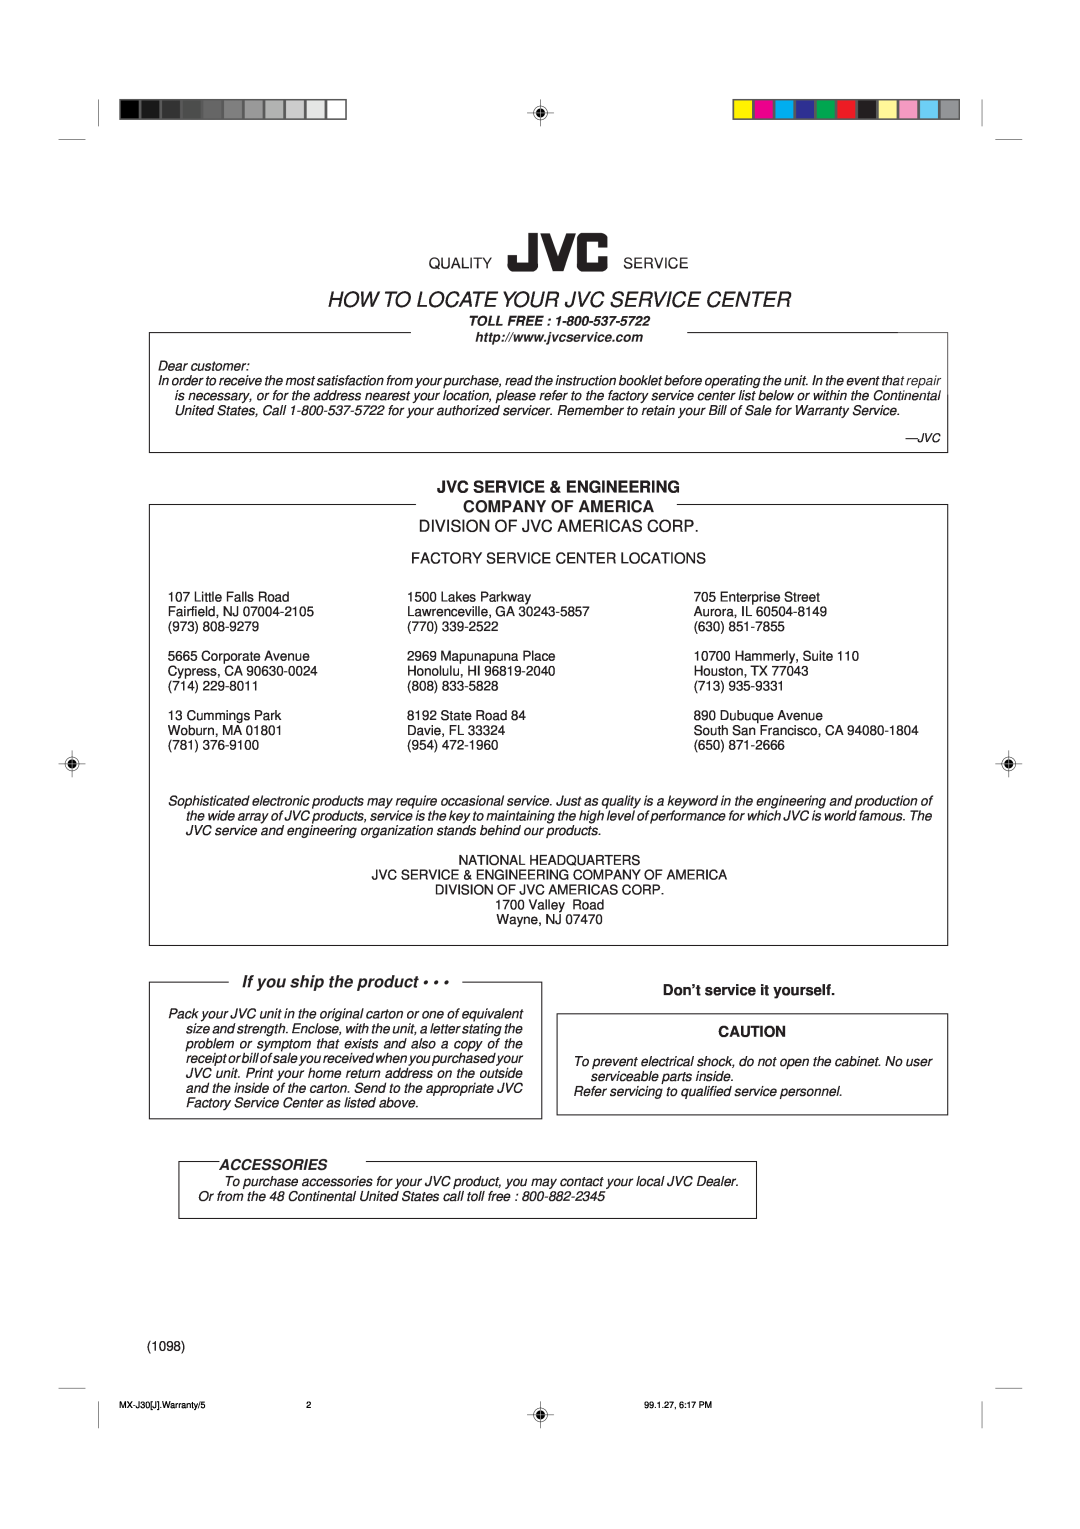 JVC MX-J30 manual Jvc Service & Engineering Company Of America, Division Of Jvc Americas Corp, Qualityservice, Accessories 